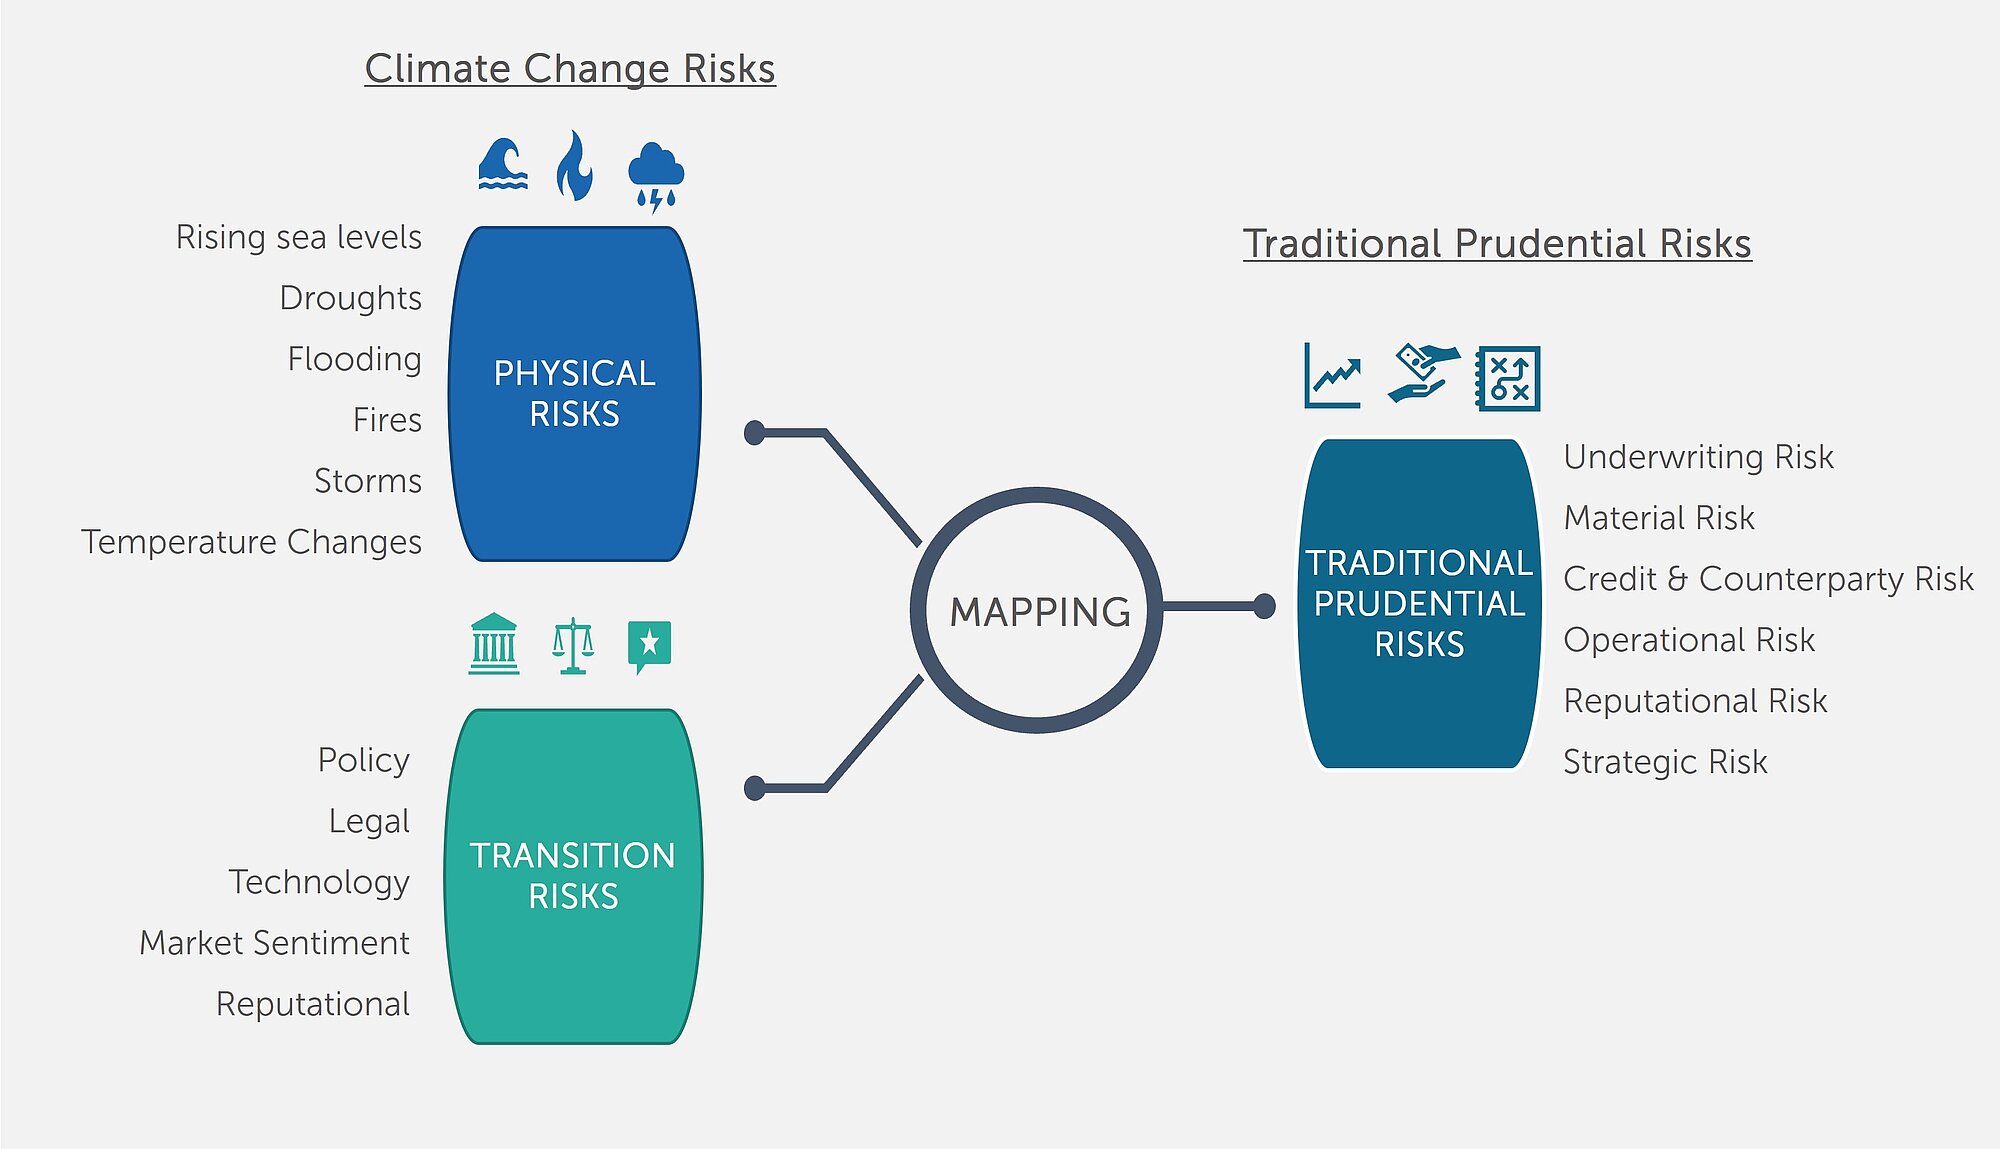 This image shows the mapping of climate change risks - both physical and transitional, together with traditional prudential risks